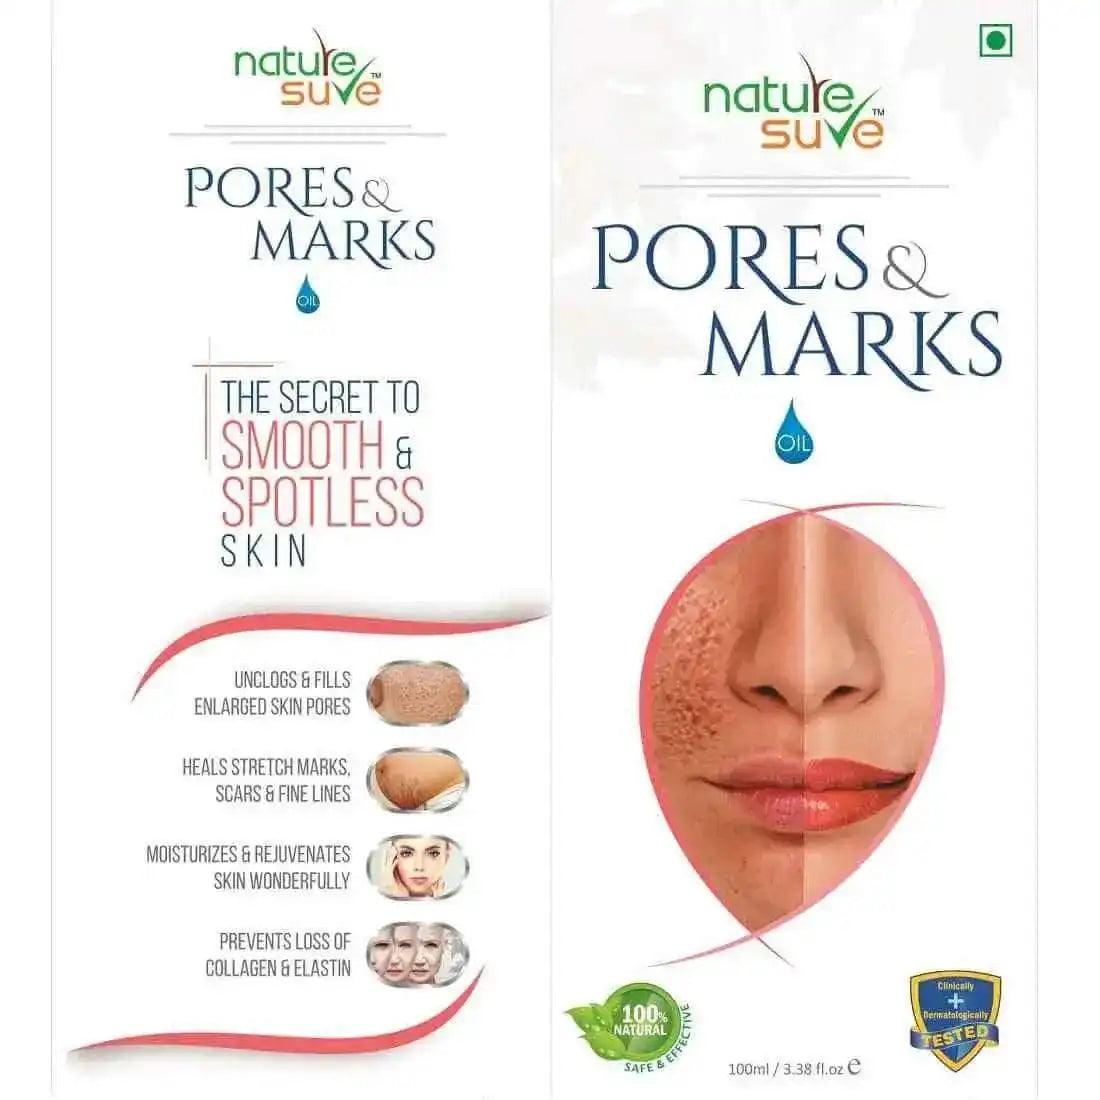 Nature Sure Pores and Marks Oil for Smooth, Spotless Skin - everteen-neud.com